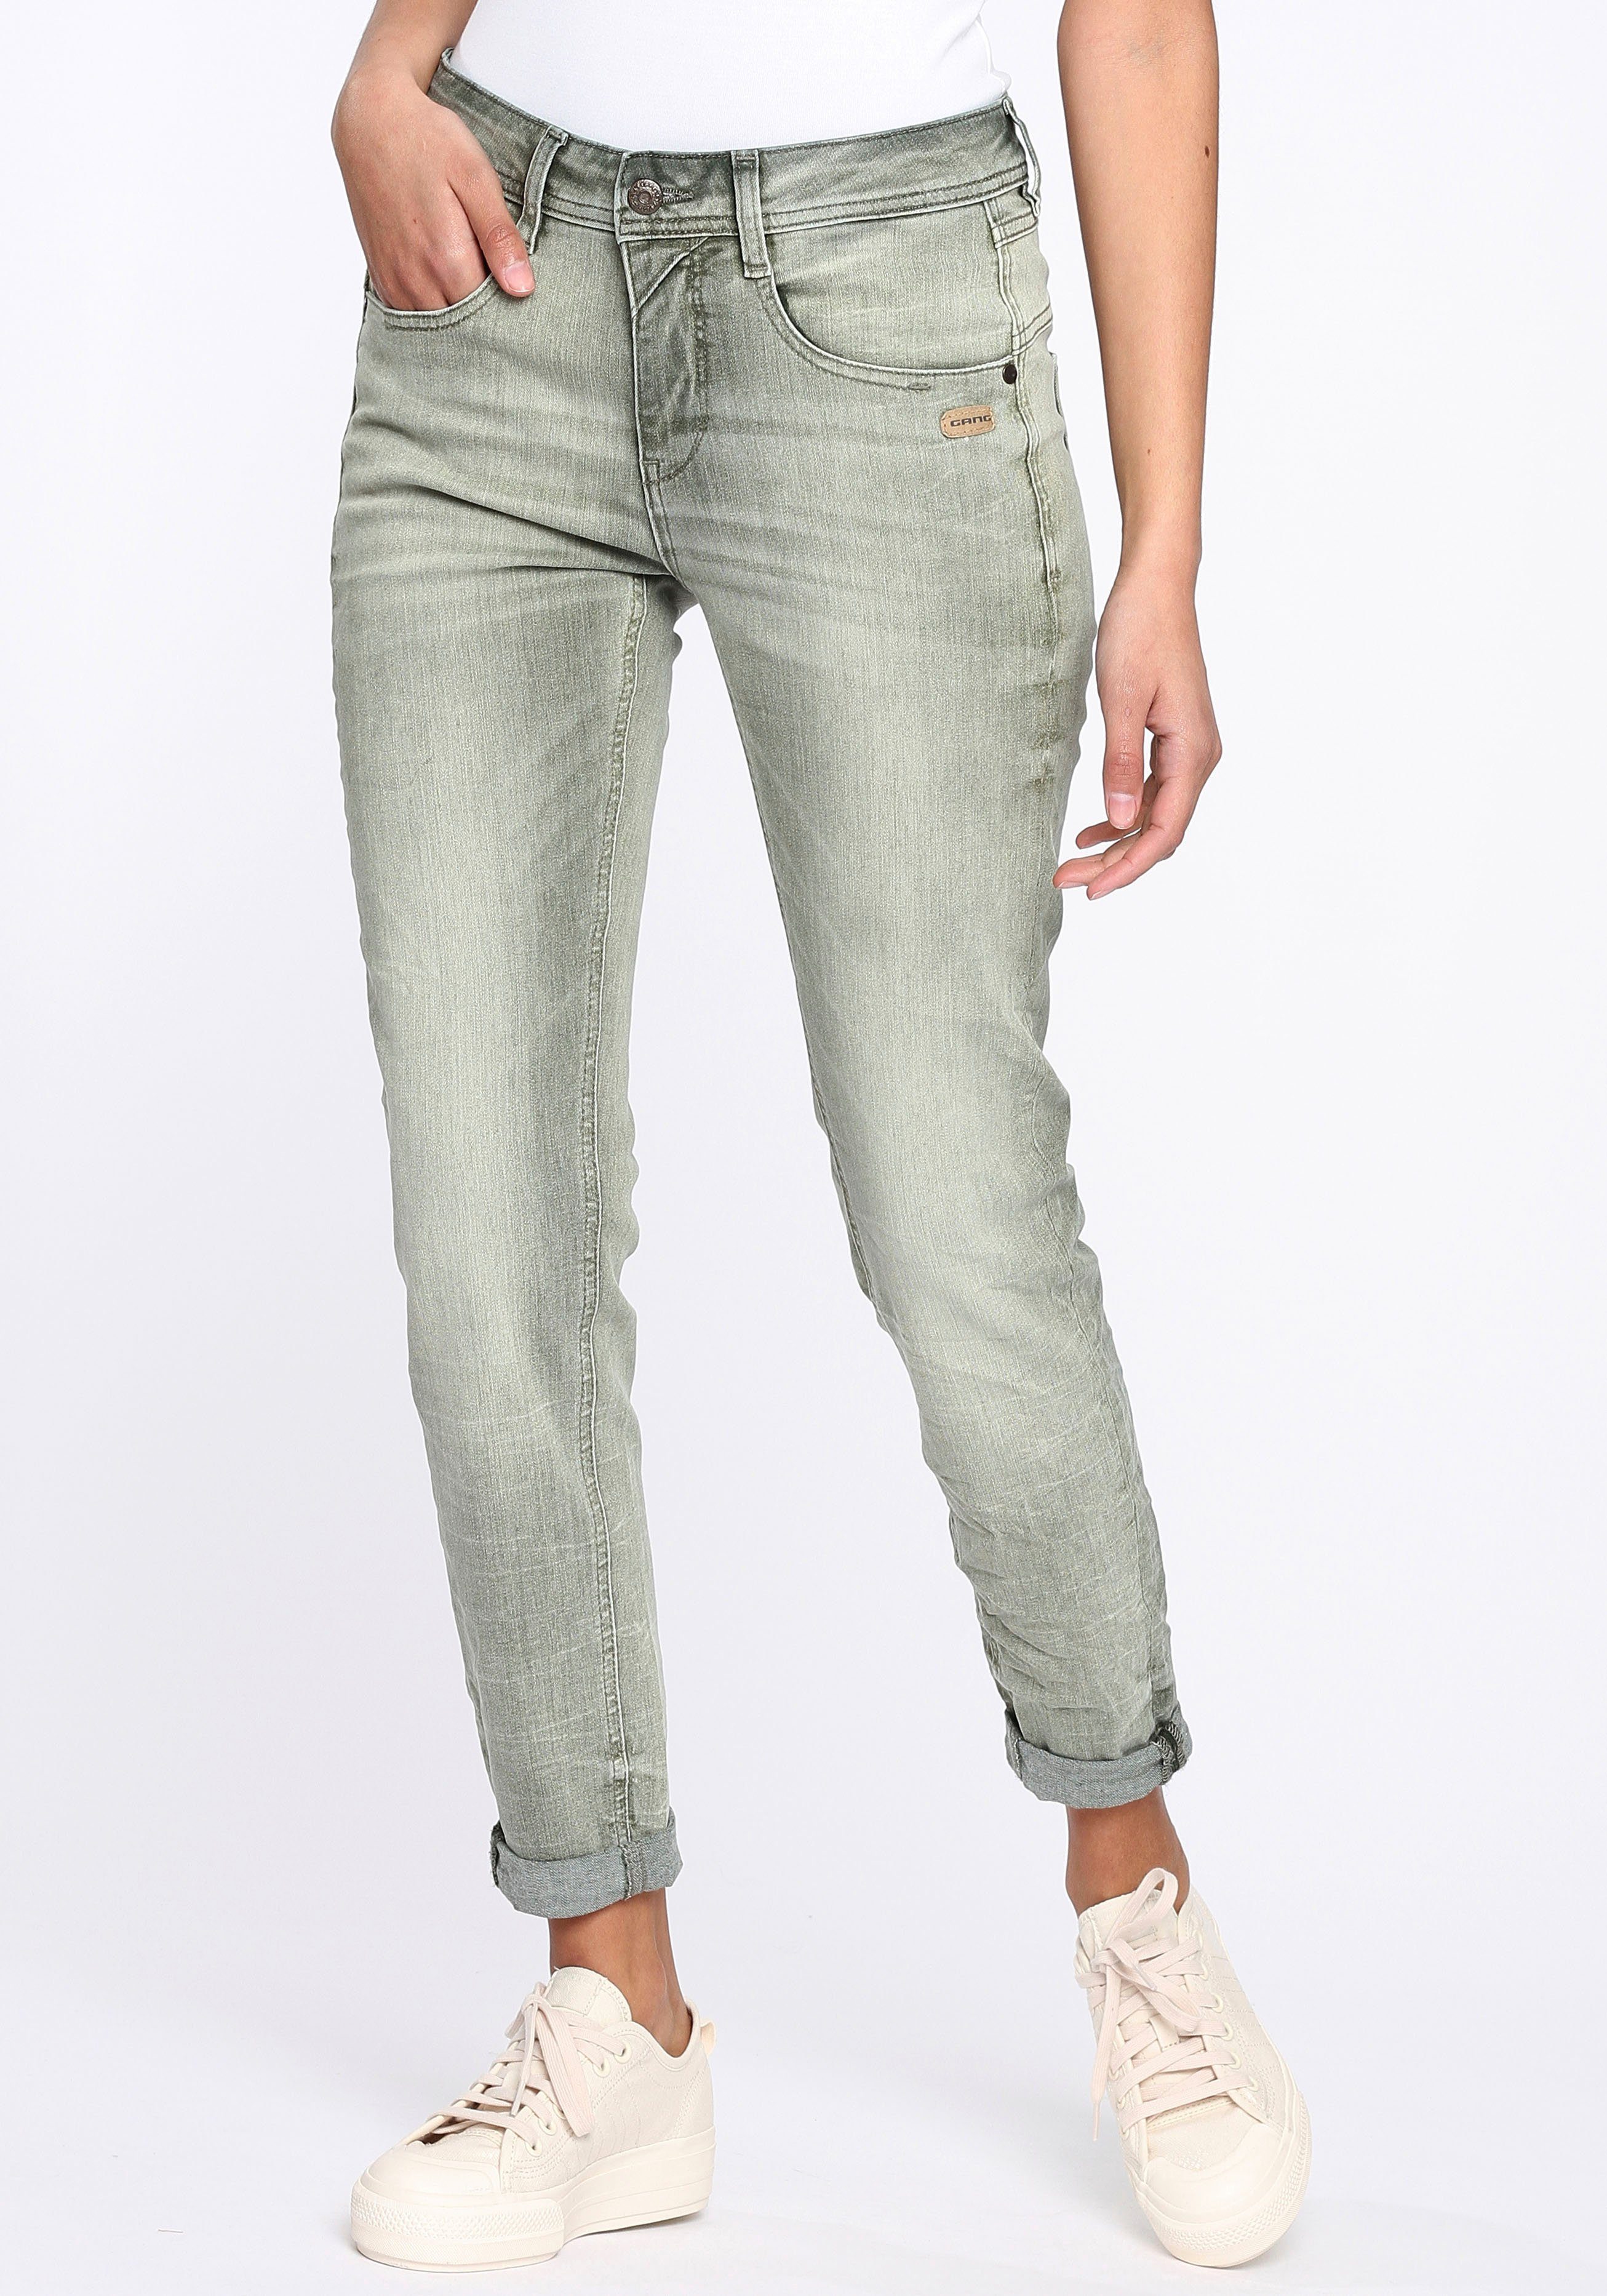 used) Elasthan-Anteil down washed perfekter GANG (grey 94AMELIE Sitz Relax-fit-Jeans durch